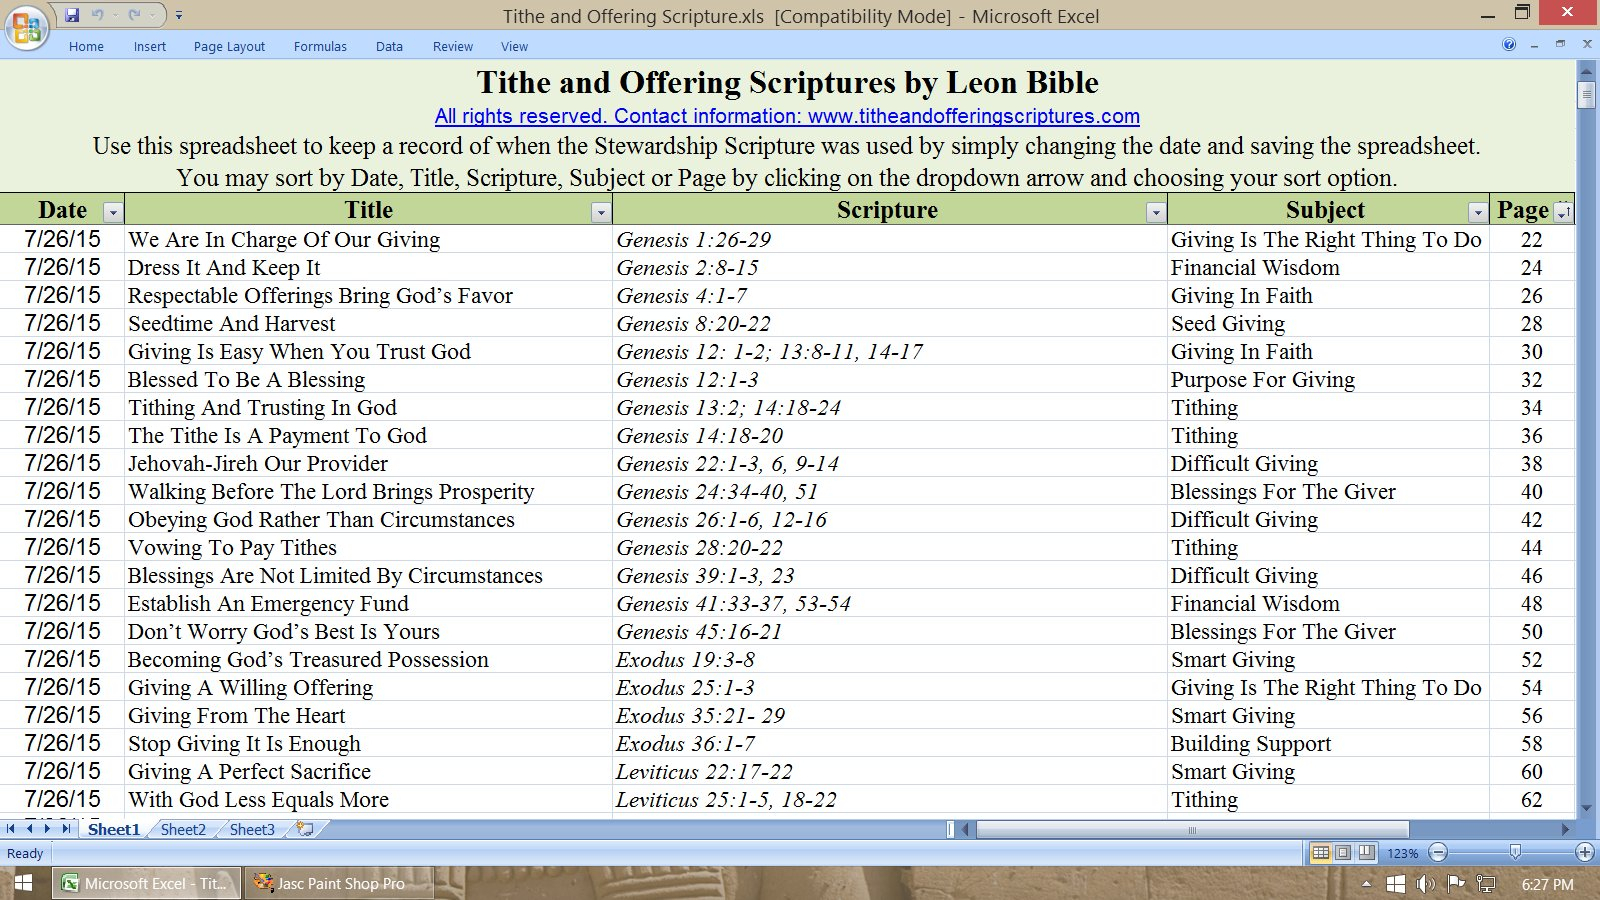 Tithing Spreadsheet Throughout Tithe And Offering Scriptures The Complete Collection